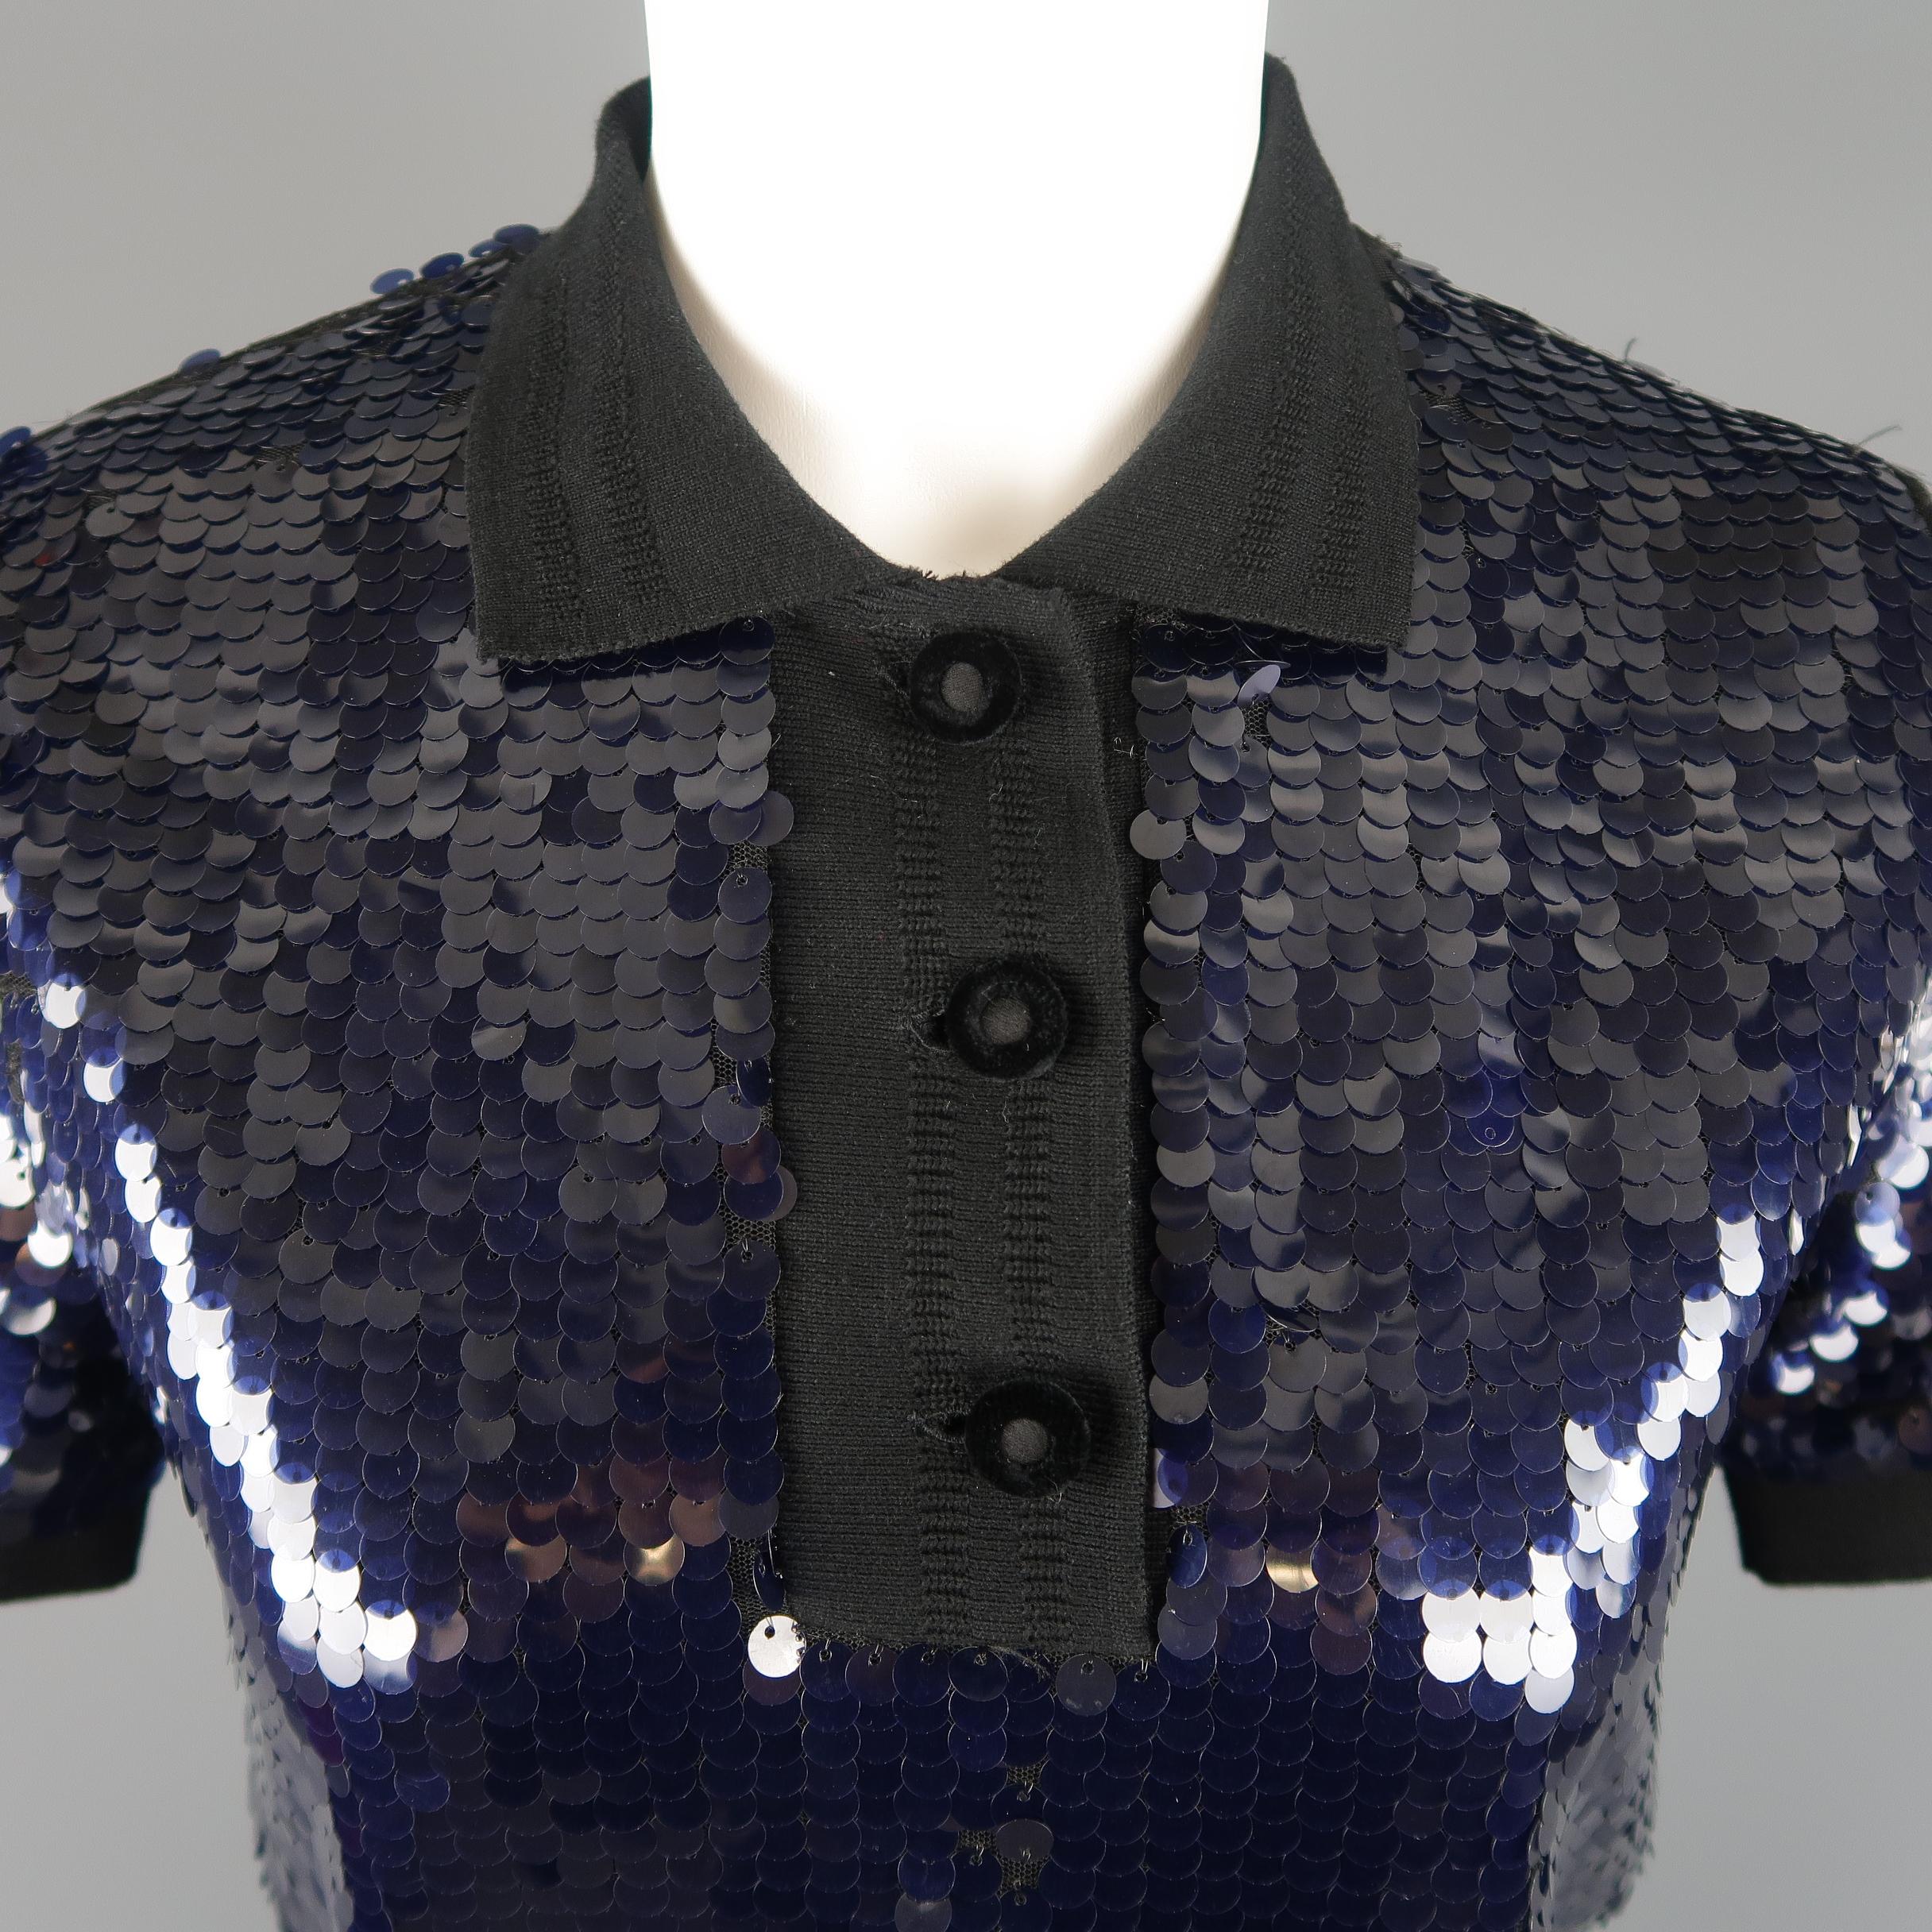 CARVEN polo style top comes in navy blue payette sequin fabric with black knit collar cuffs, and half button closure. Some wear through fabric. Fully lined. No stretch. Runs small.
 
Good Pre-Owned Condition.
Marked: M
 
Measurements:
 
Shoulder: